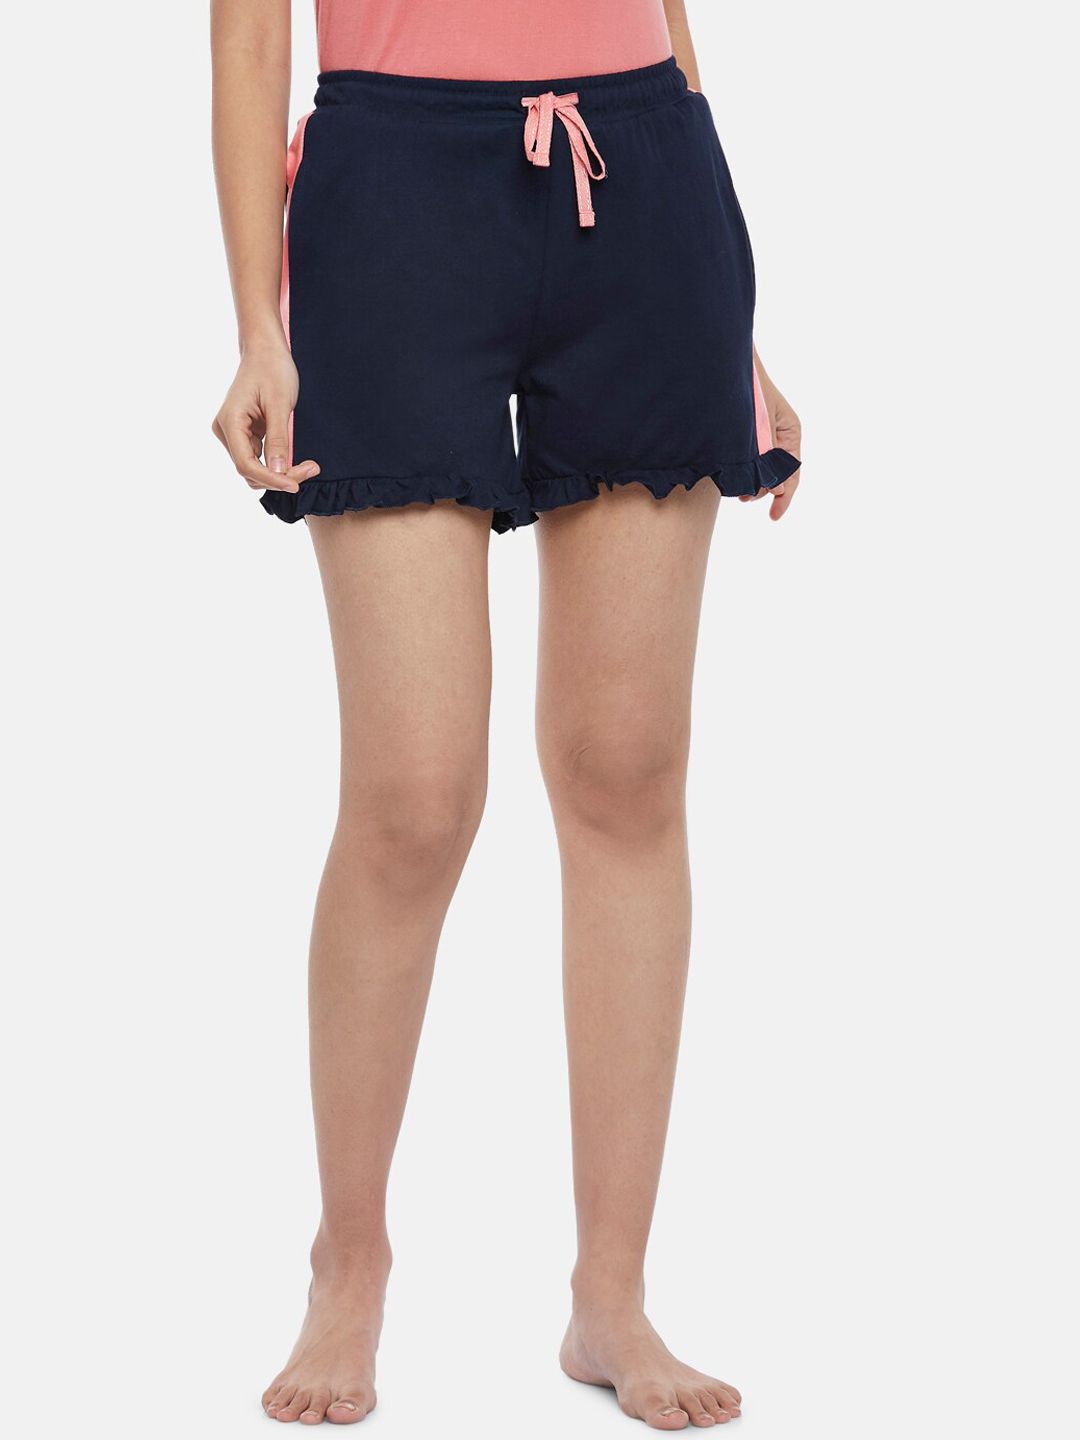 Dreamz by Pantaloons Women Navy Blue Cotton Lounge Shorts Price in India